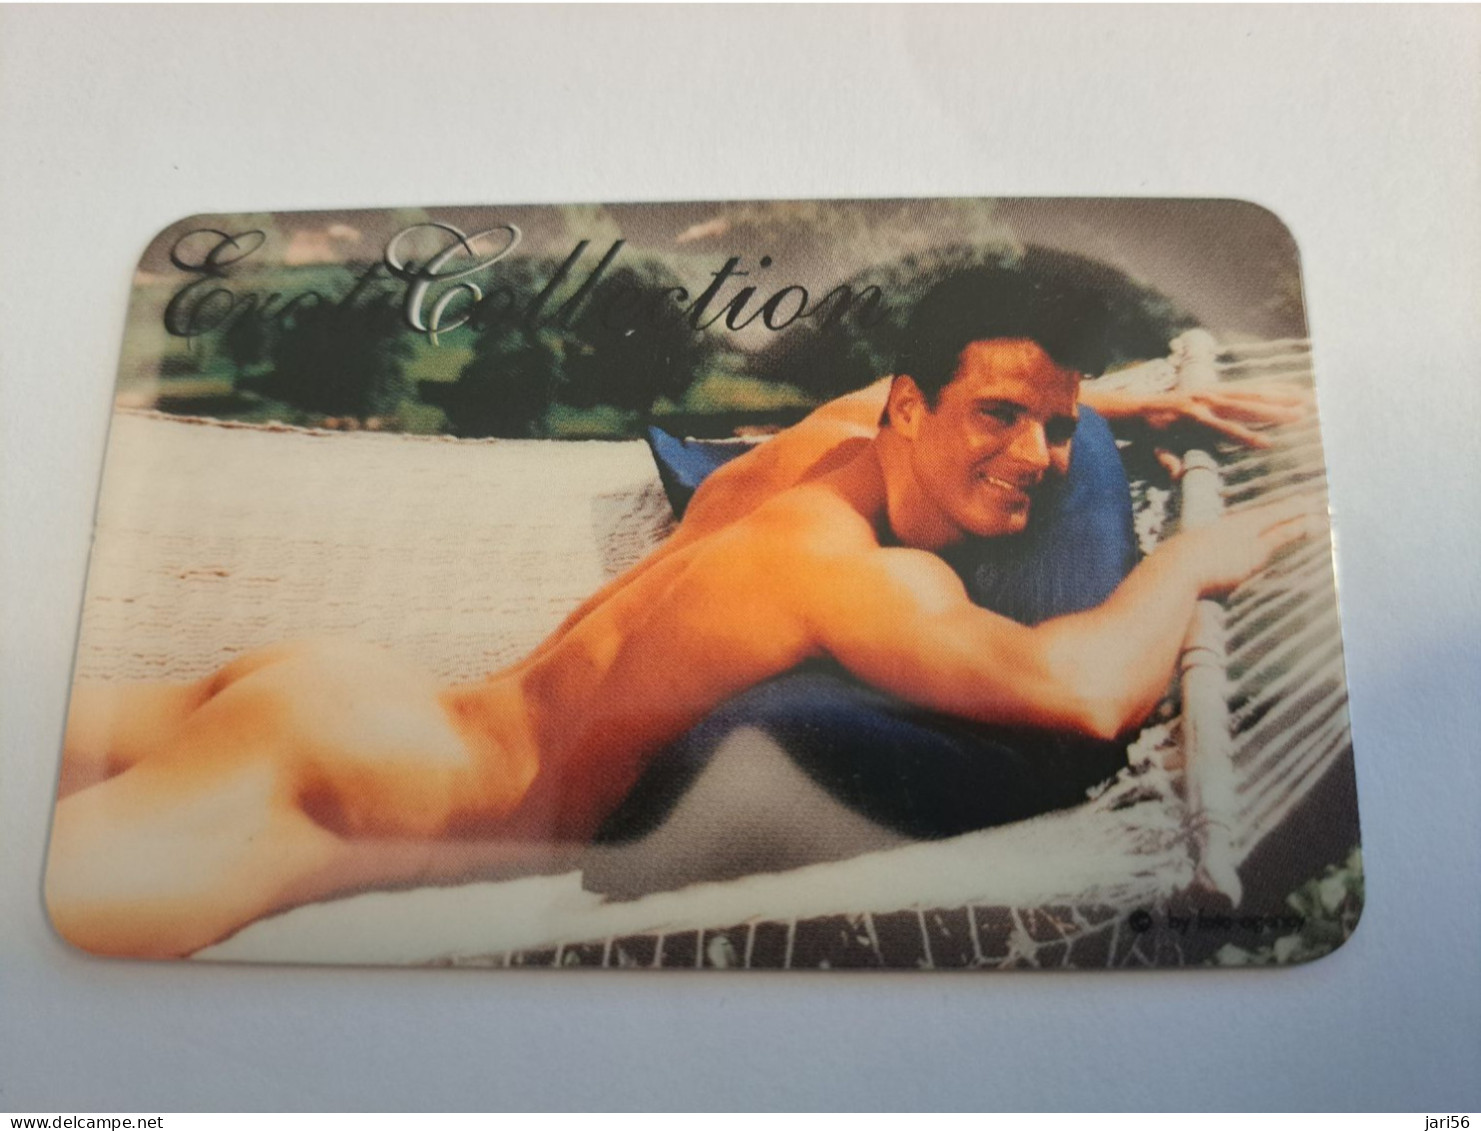 GREAT BRITAIN /20 UNITS / EROTIC COLLECTION / MODEL / NAKED MAN  / (date 09/00)  PREPAID CARD / MINT  **15905** - Collections